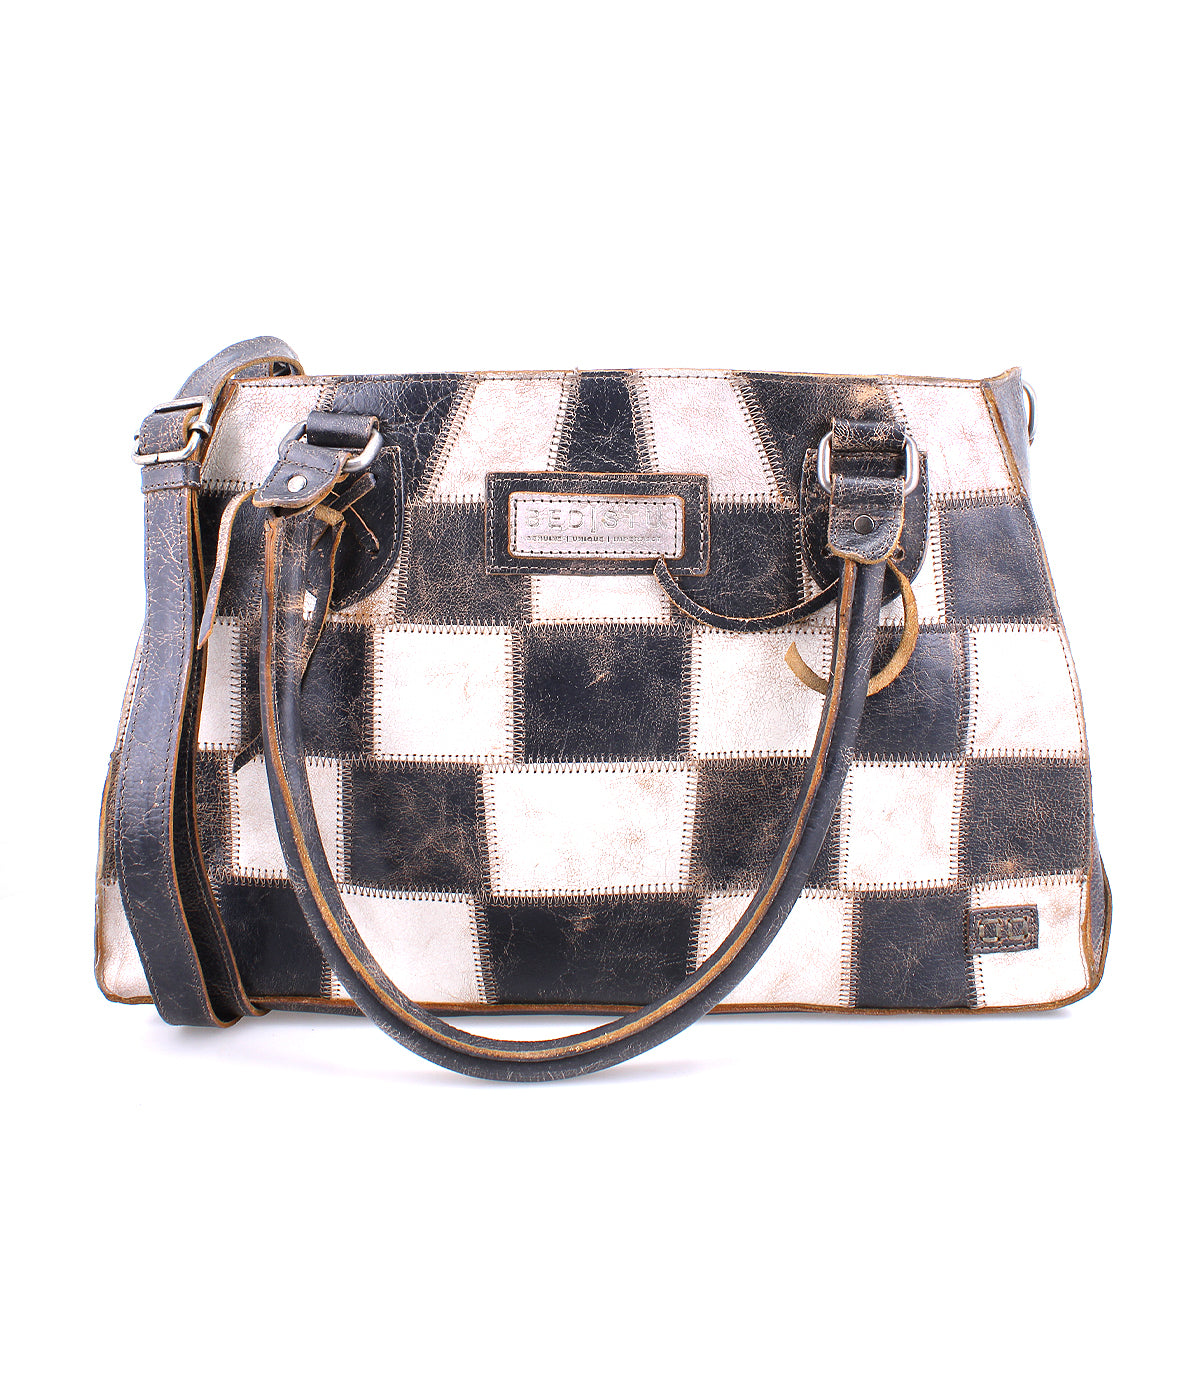 A sustainable, checkered Rockababy SL handbag with brown leather trim and handles on a white background by Bed Stu.